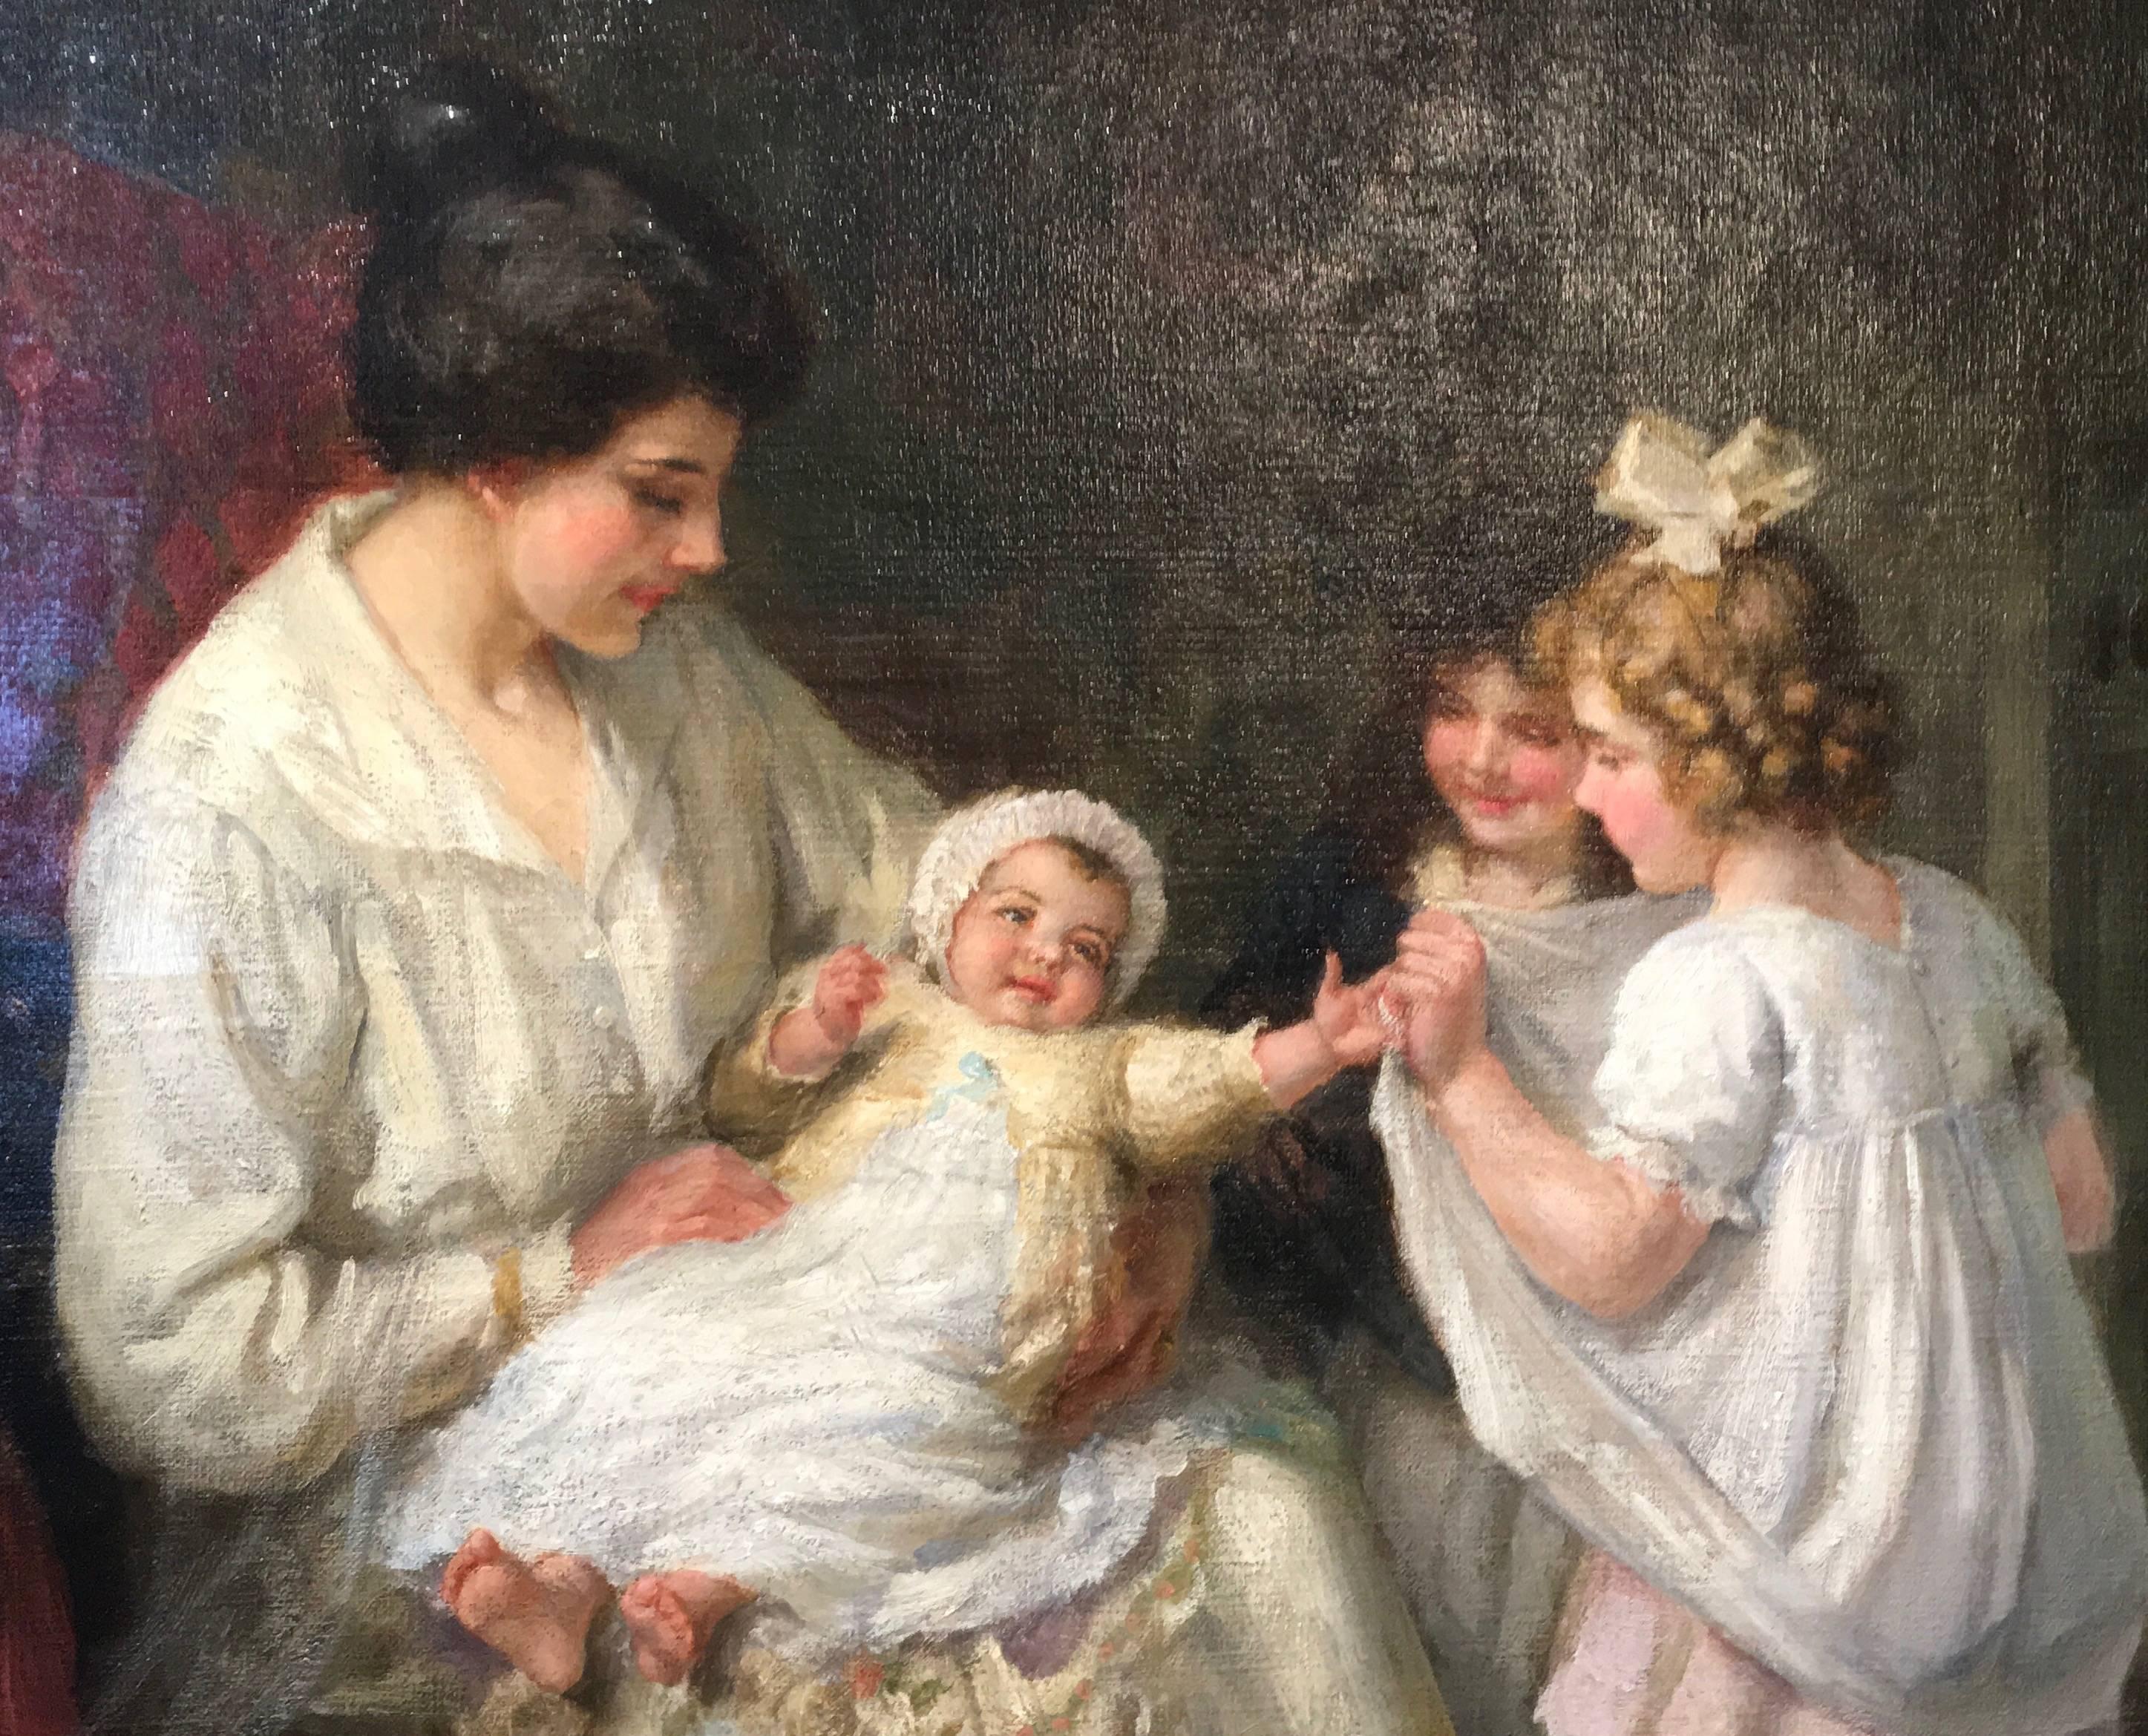 Baby's Kingdom (Mother, little girl, daughter girls, family and baby) - Painting by George Sheridan Knowles